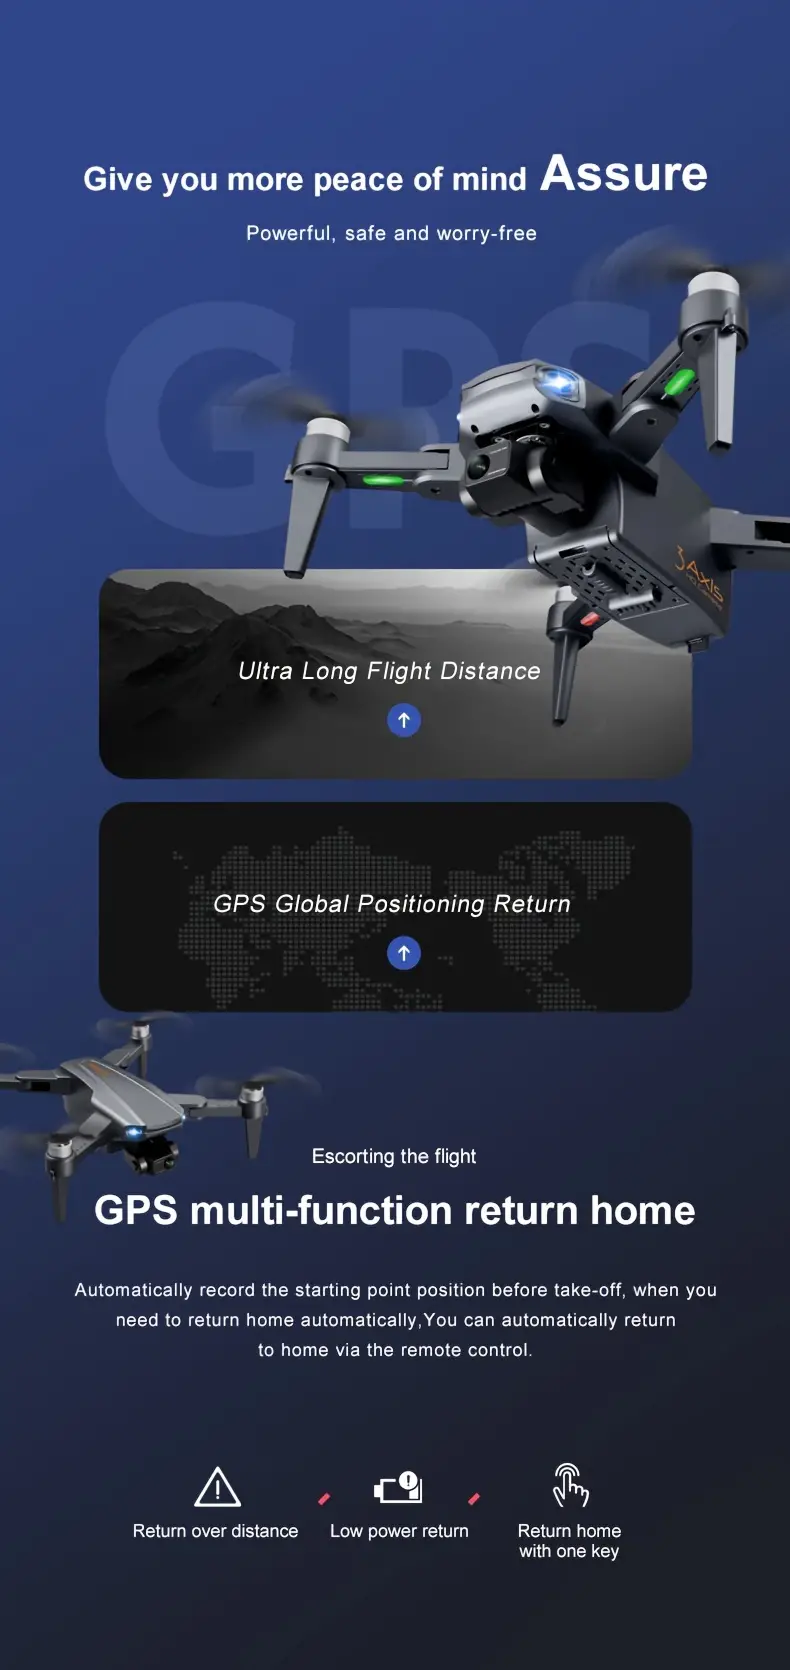 rg106 three axis self stabilizing gimbal with two batteries professional aerial drone 1080p dual camera gps positioning auto return optical flow positioning brushless motor hd image transmission foldable quadcopter with storage backpack beautiful color box christmas thanksgiving halloween gift details 4